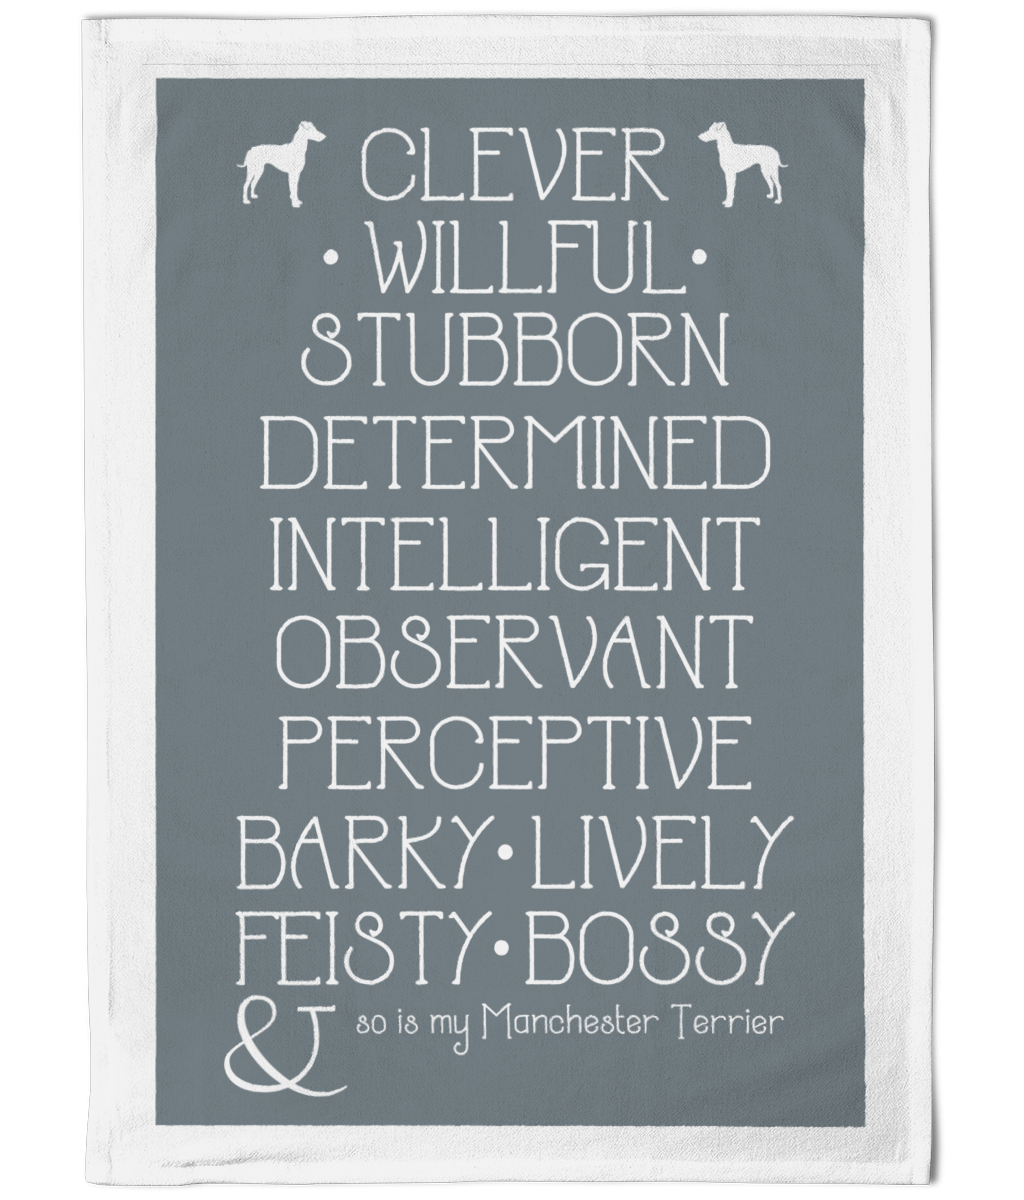 My Manchester Terrier and Me Cotton Tea Towel